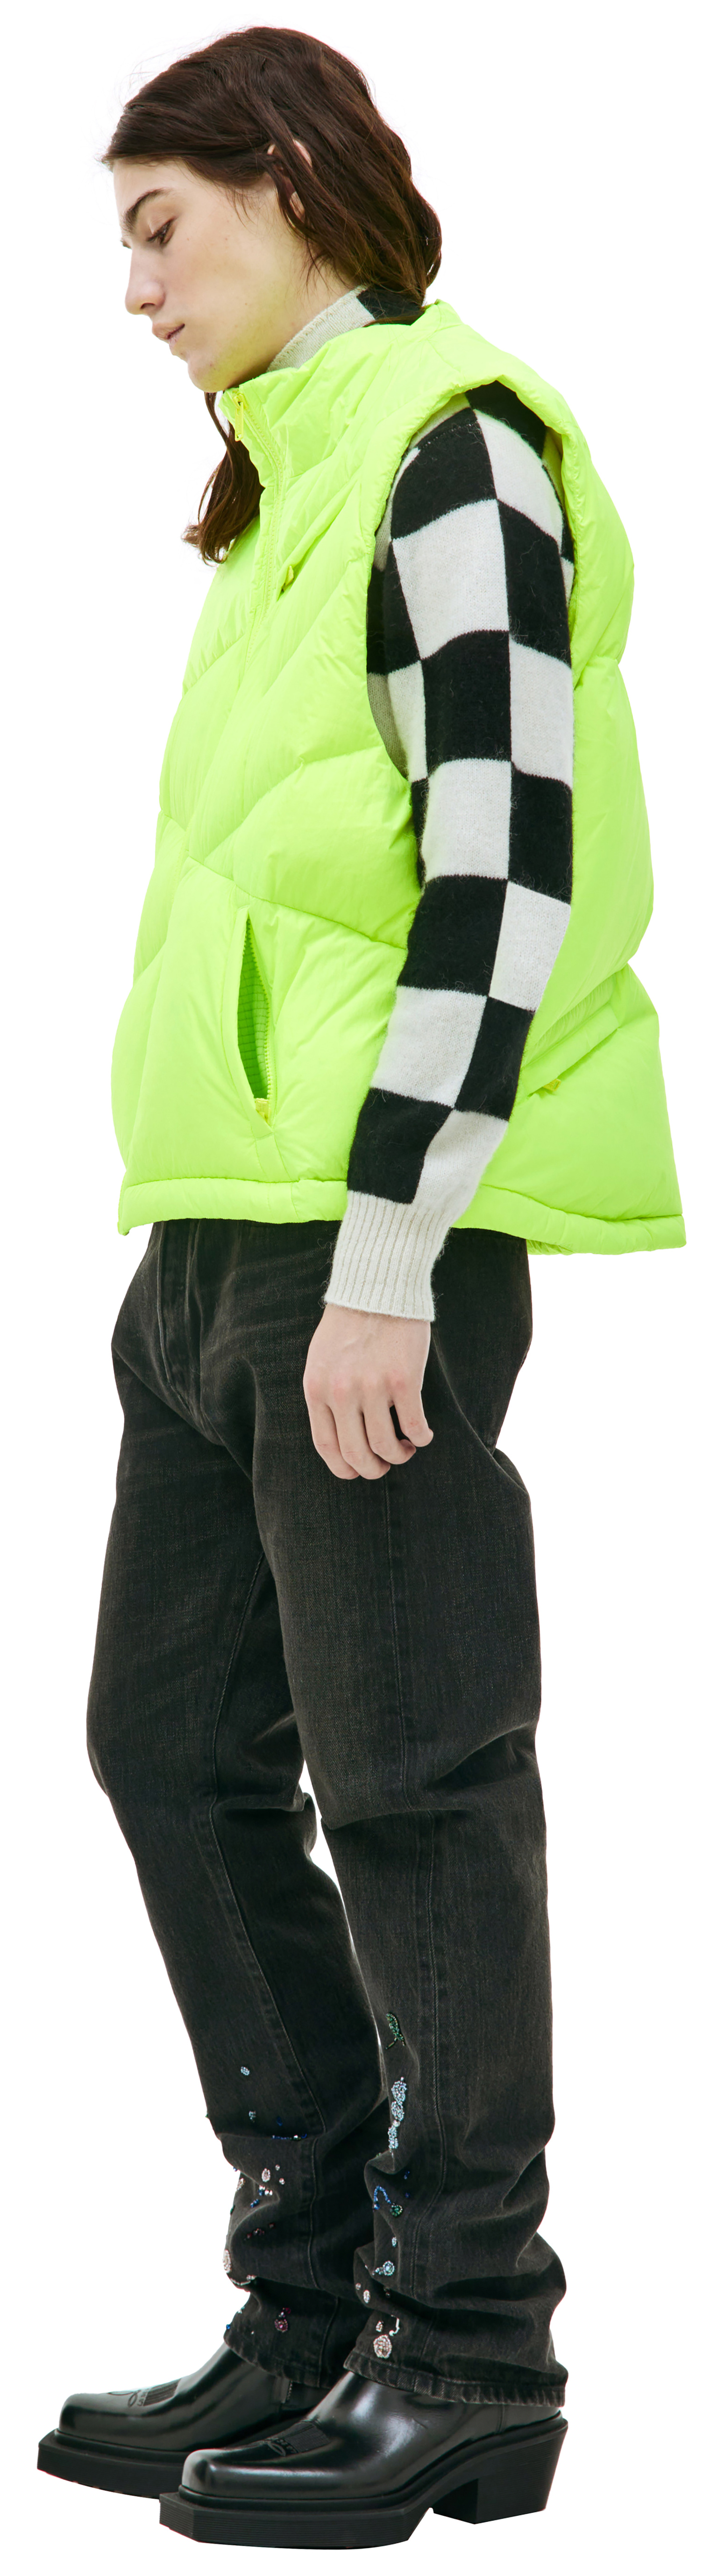 Buy Undercover men yellow quilted nylon vest for $1,800 online on